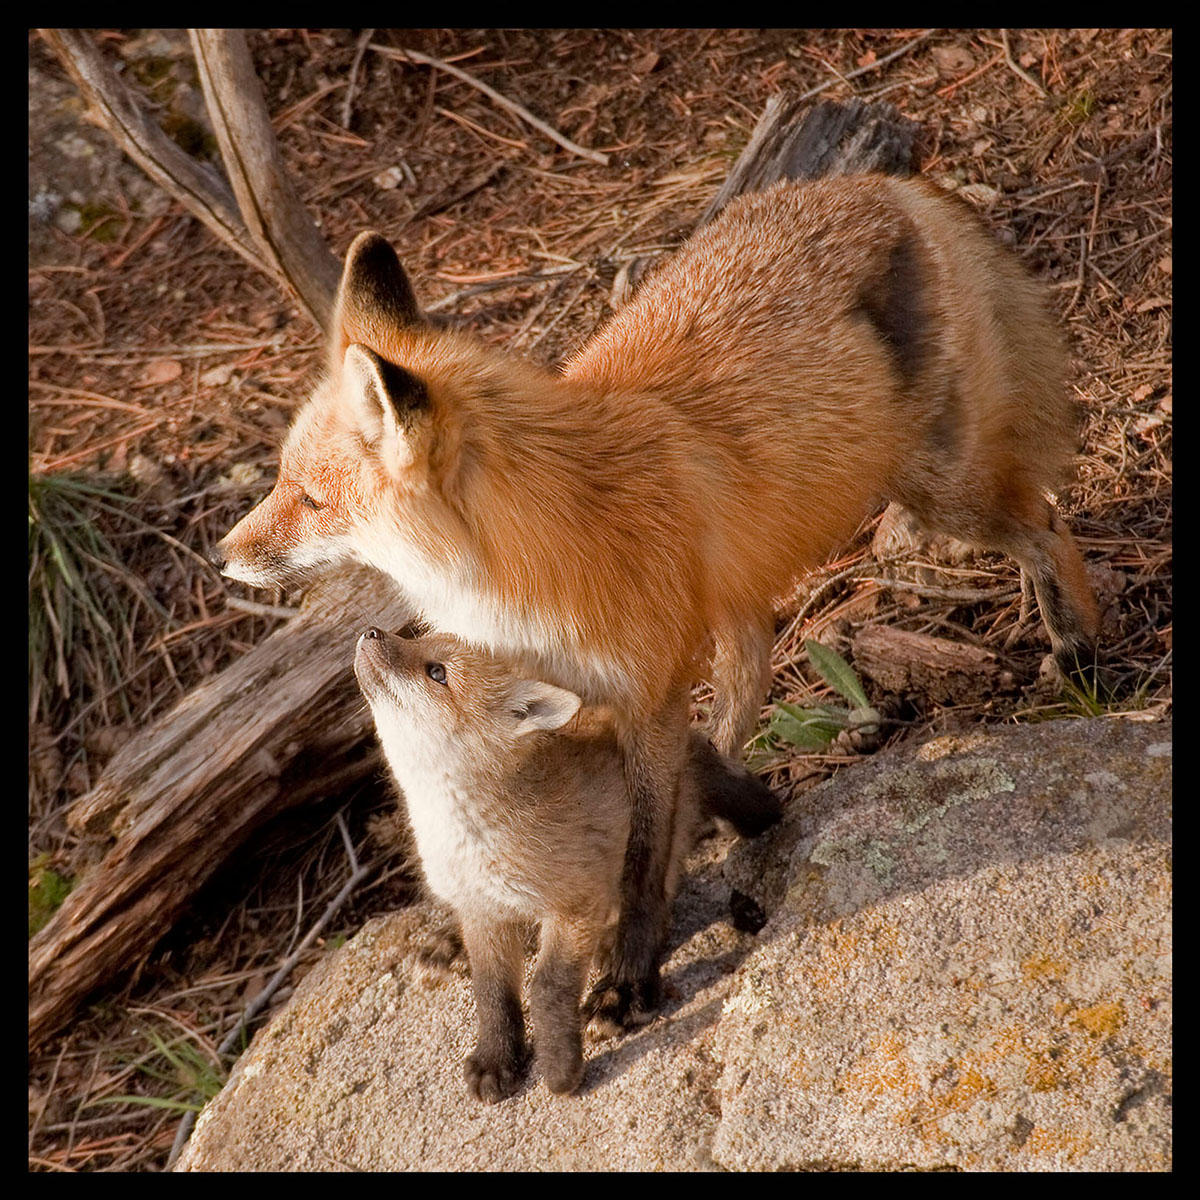 True Love-#6951
Young fox with mother near Evergreen, CO